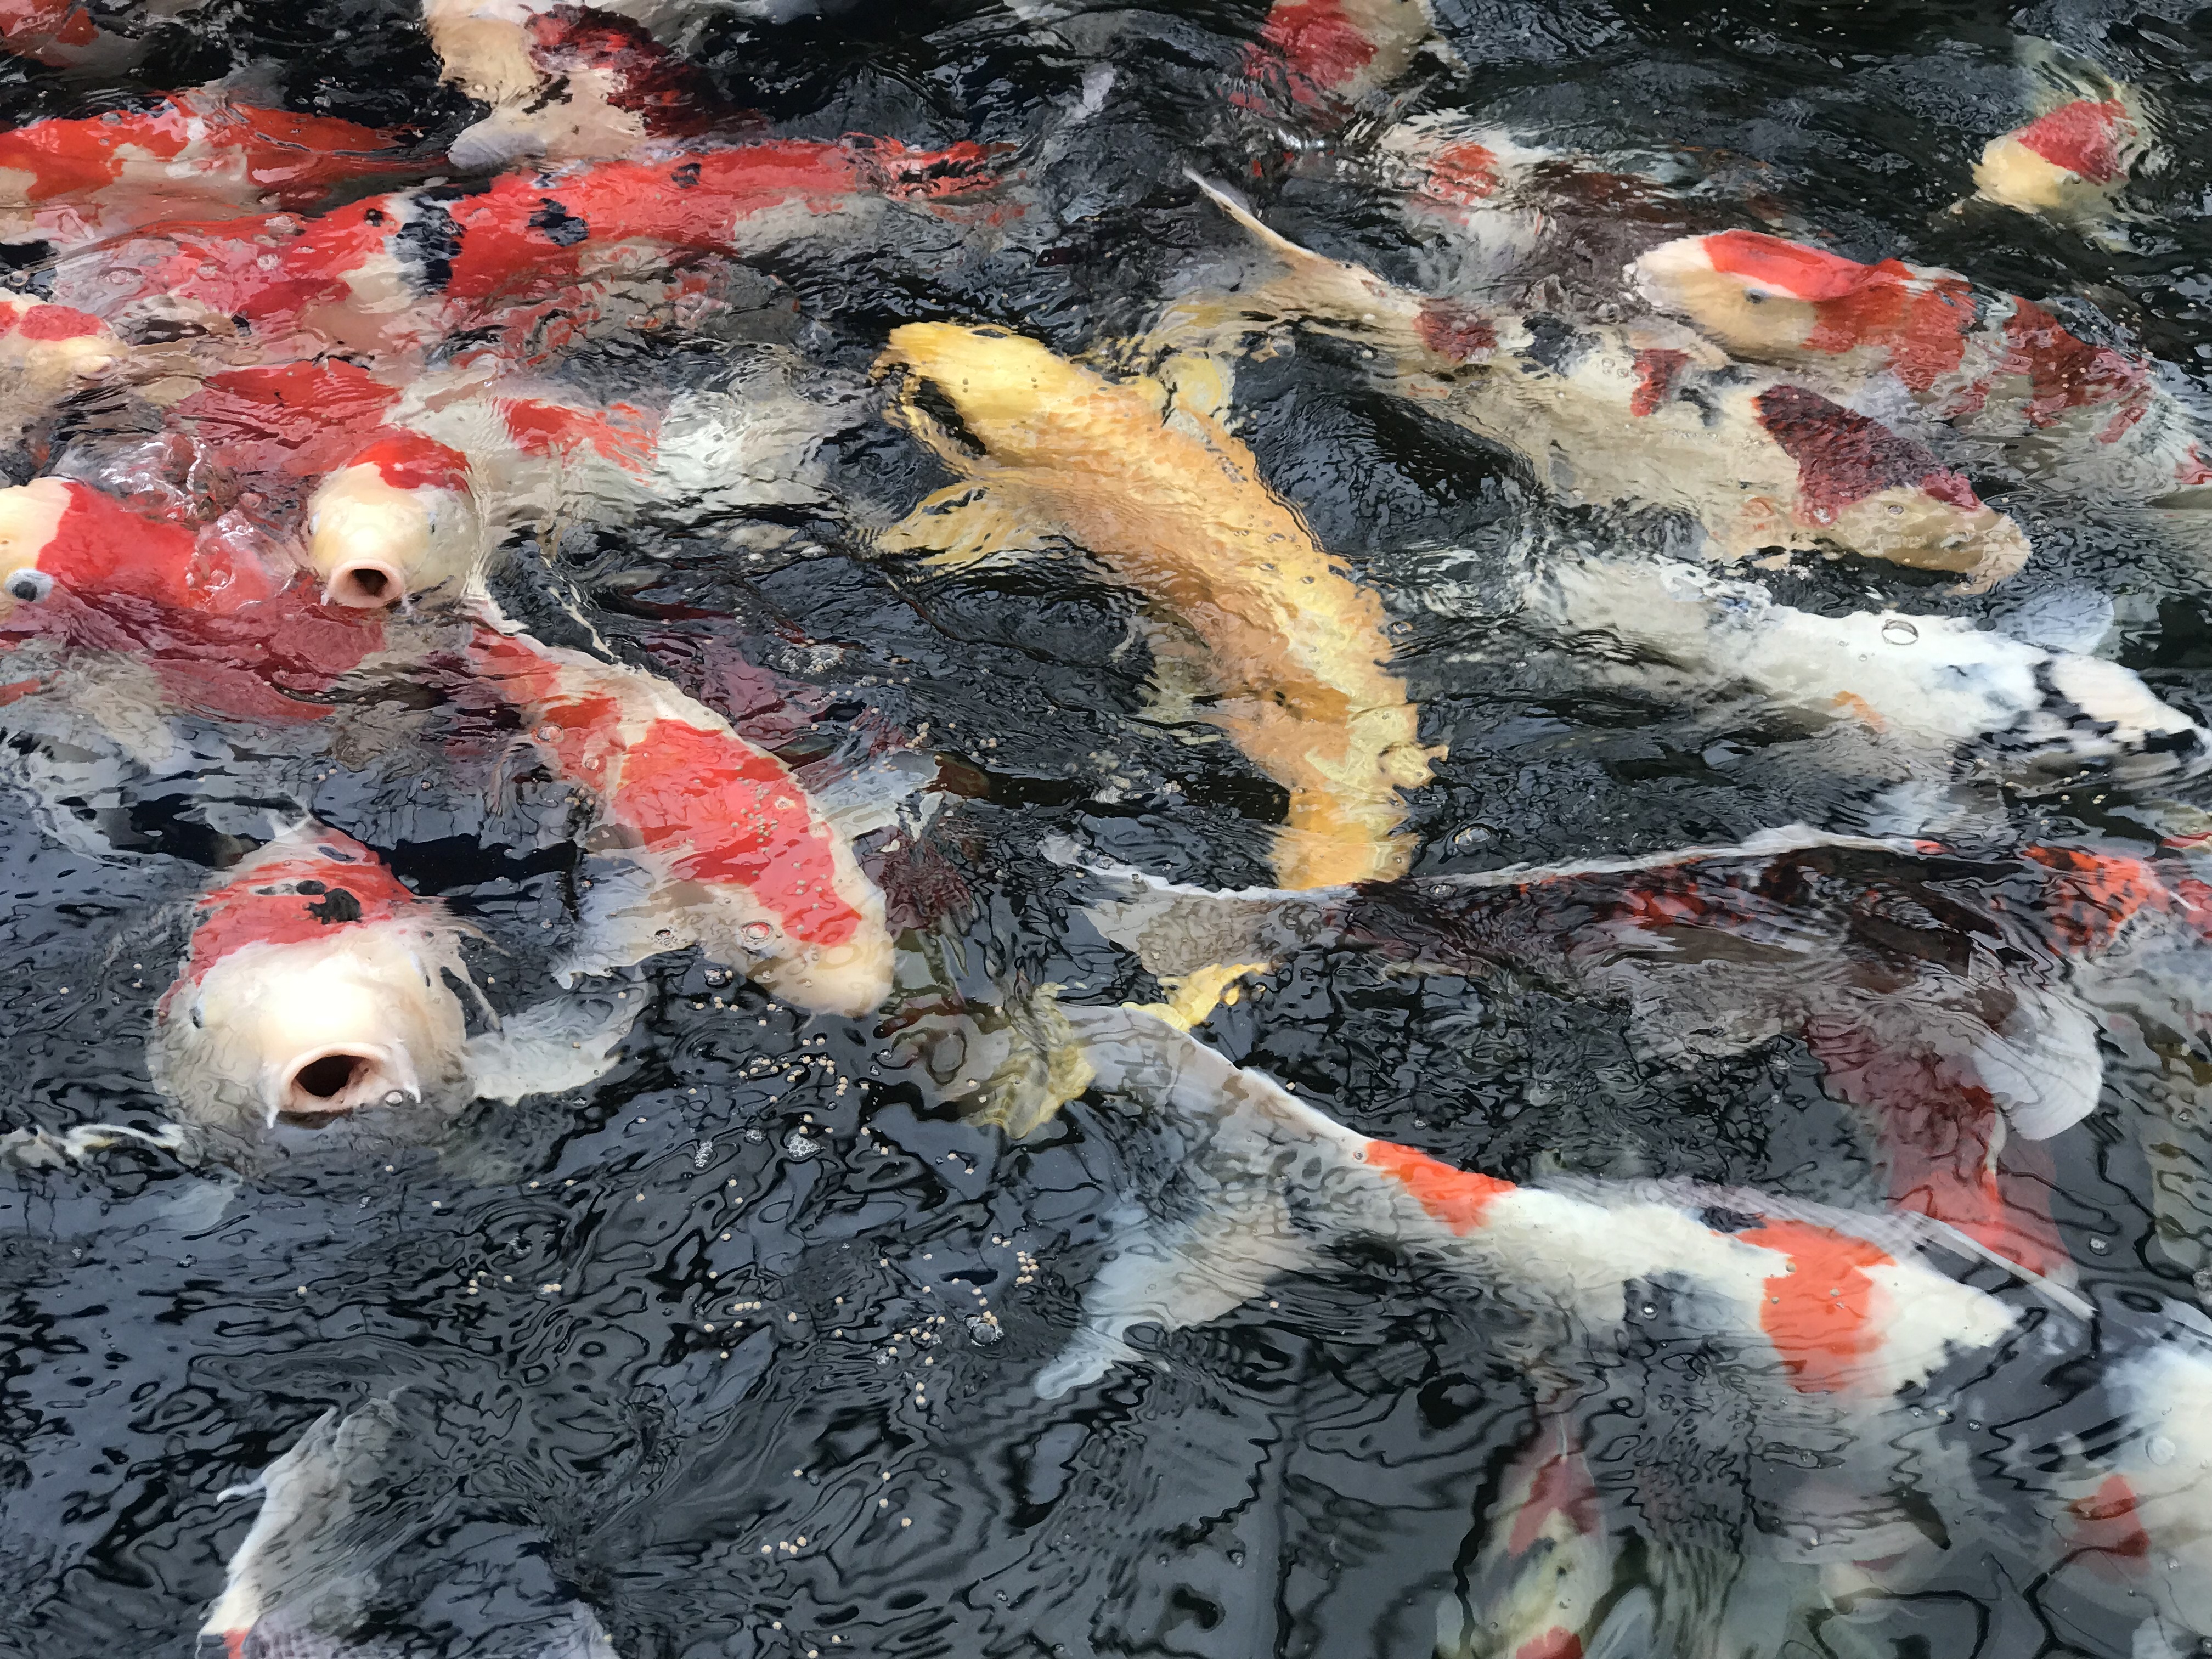 Visiting Japan on a budget. Things to do. A carp farm